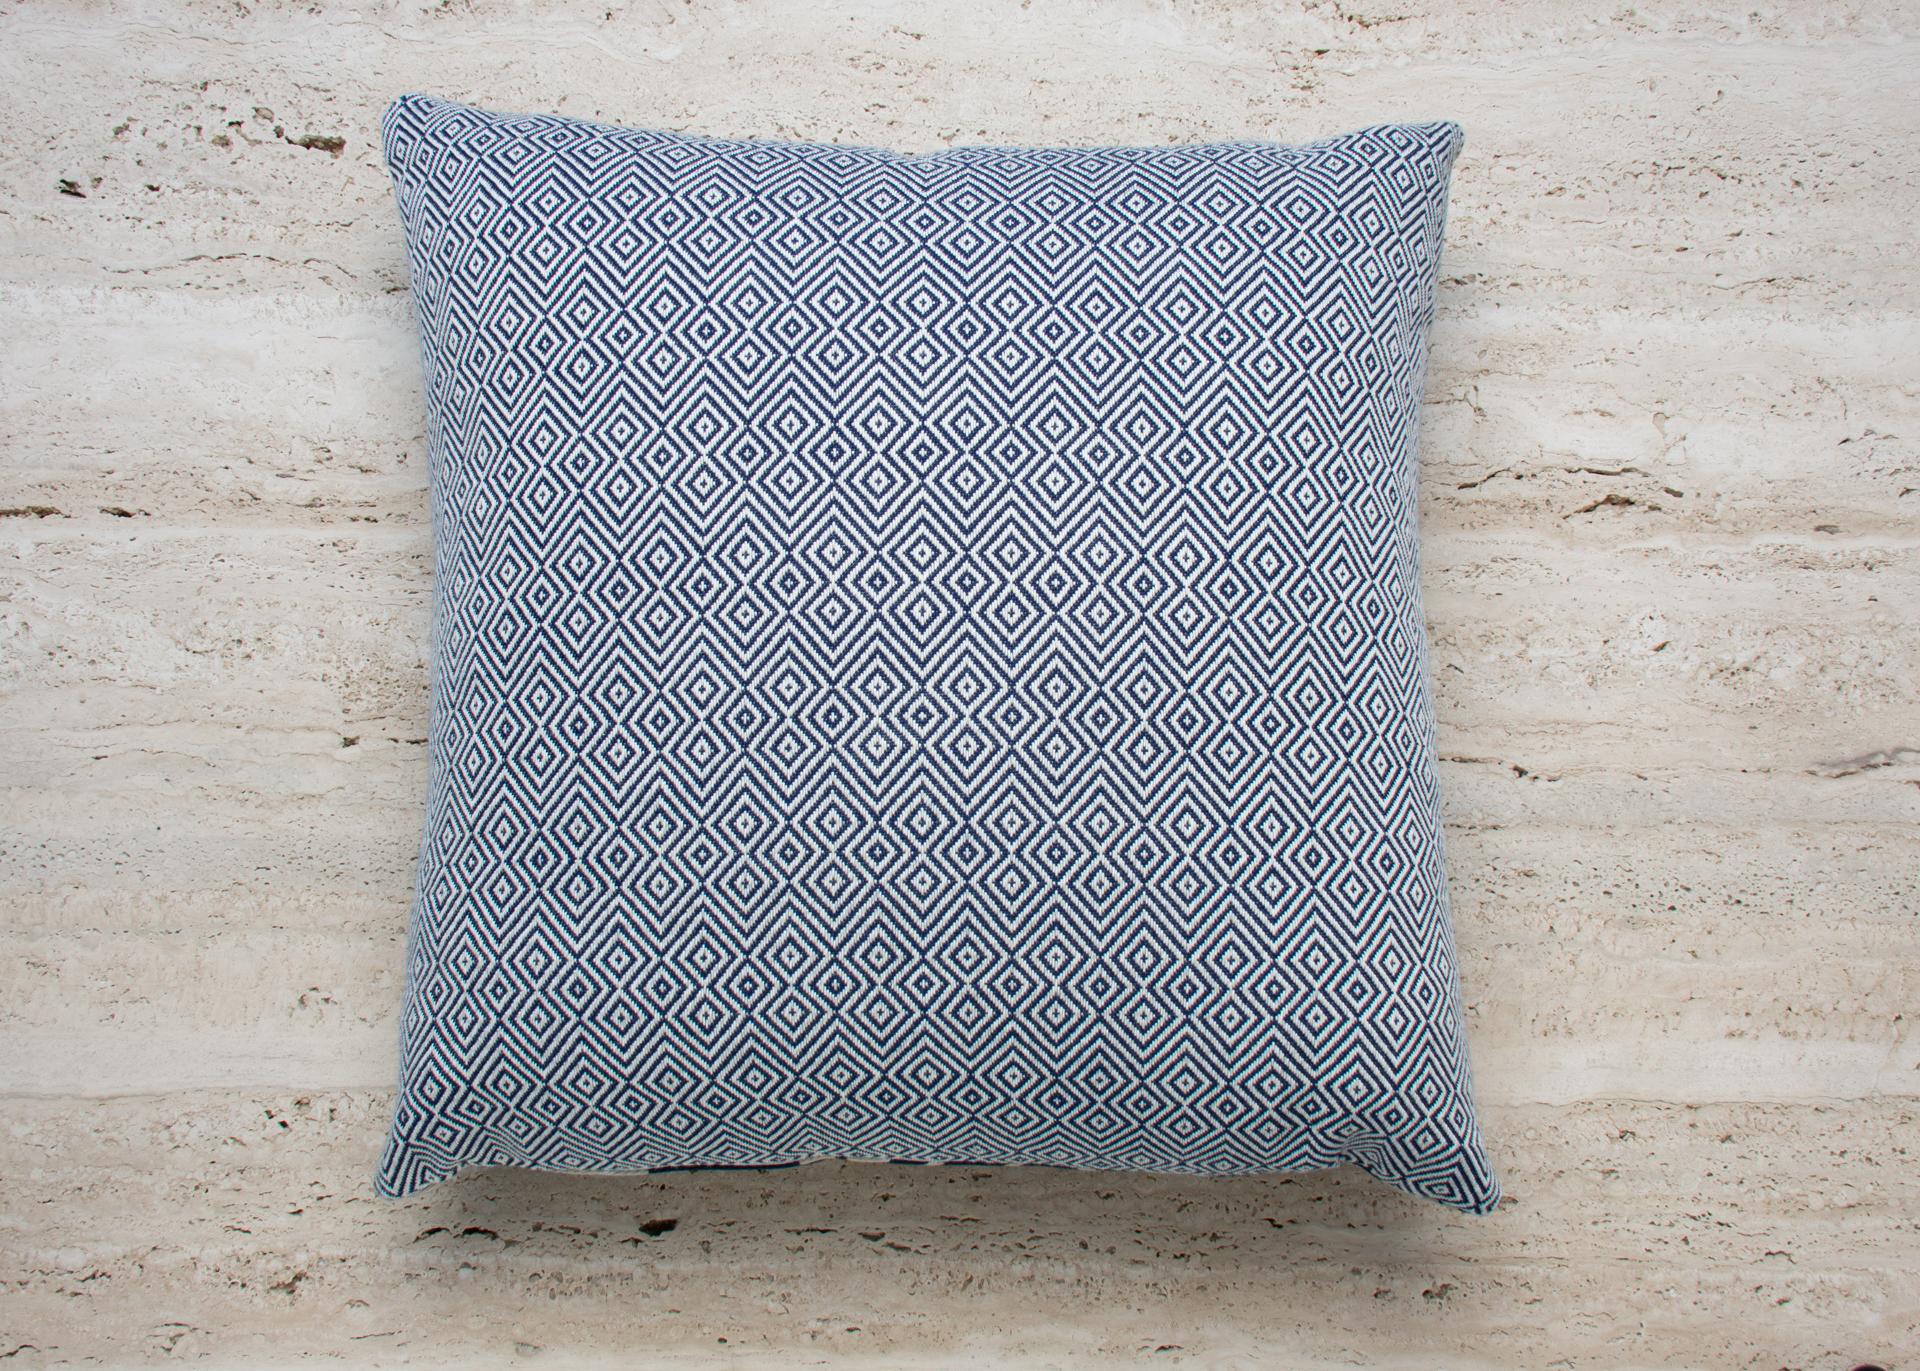 Modern Hermes Pillow Feuillage Vague in Navy, Diamond Backing For Sale